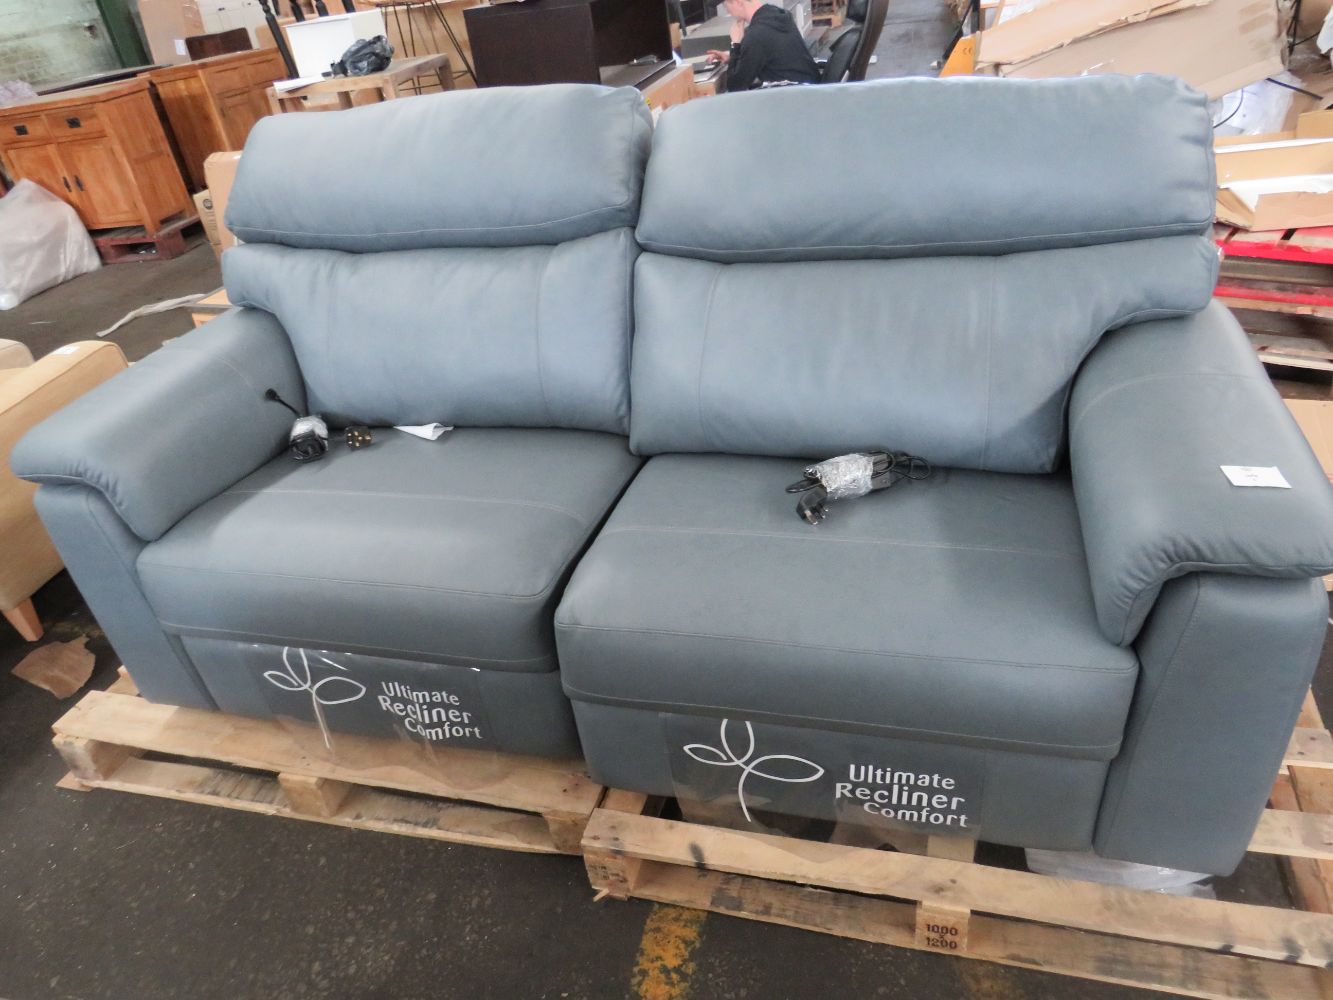 Lowest starting prices on Sofas and Chairs from Swoon, costco, Oak furniture land and more